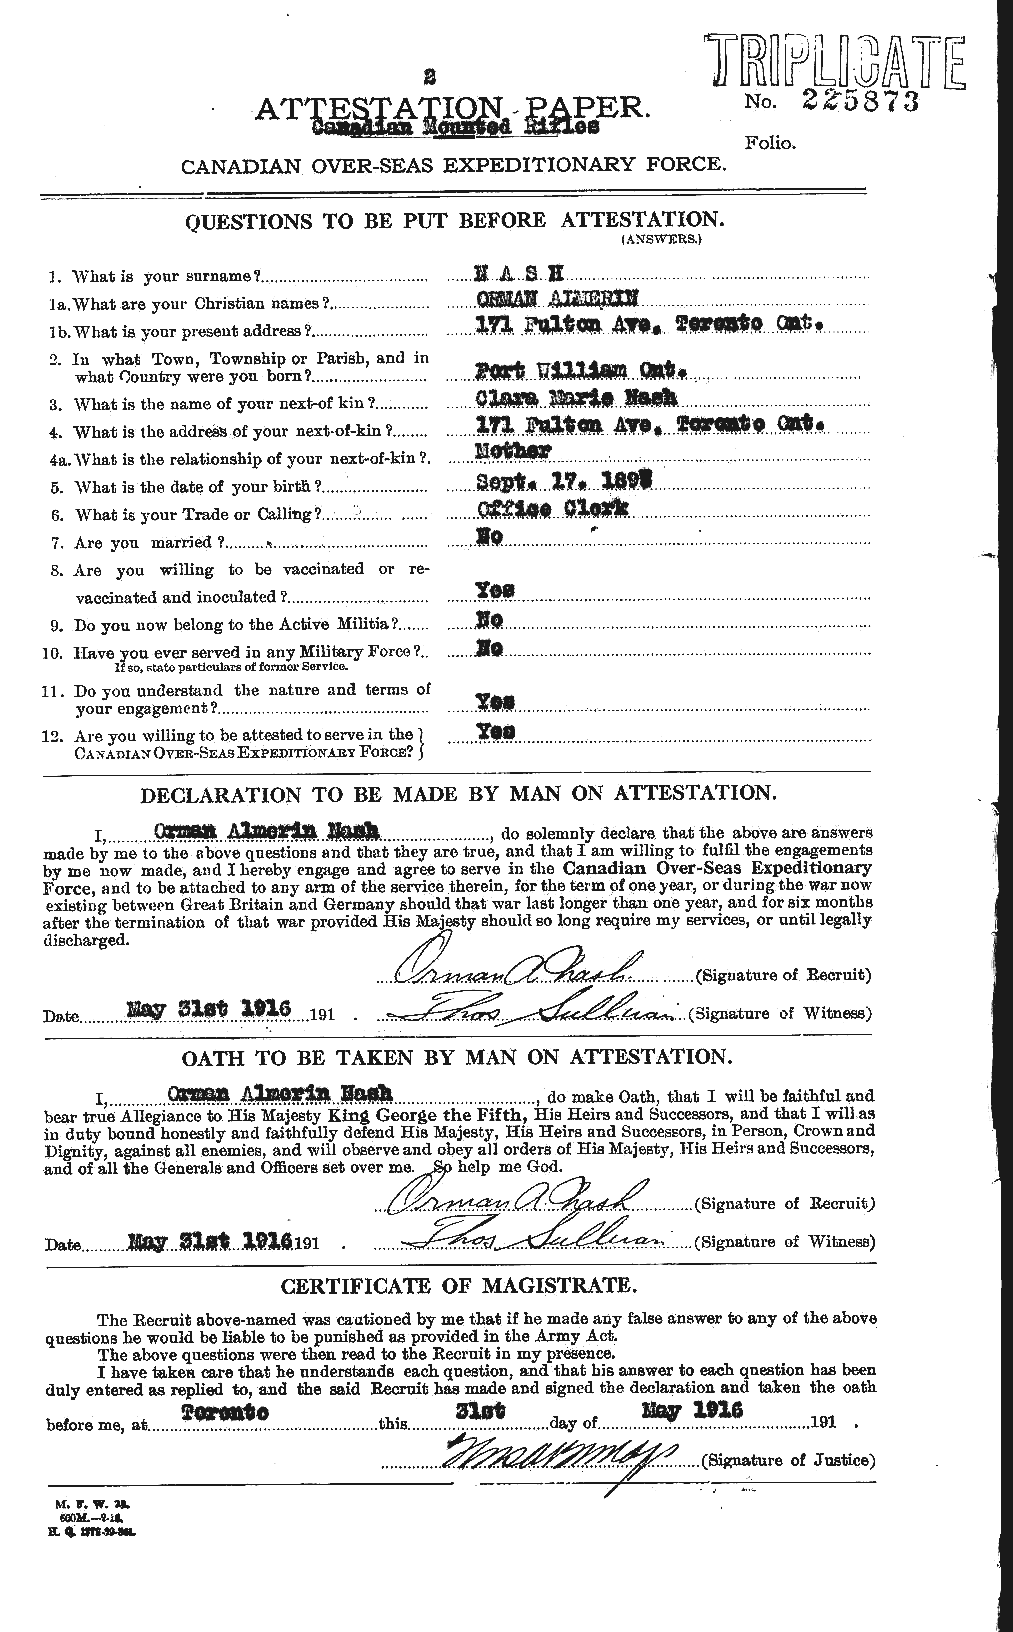 Personnel Records of the First World War - CEF 549022a